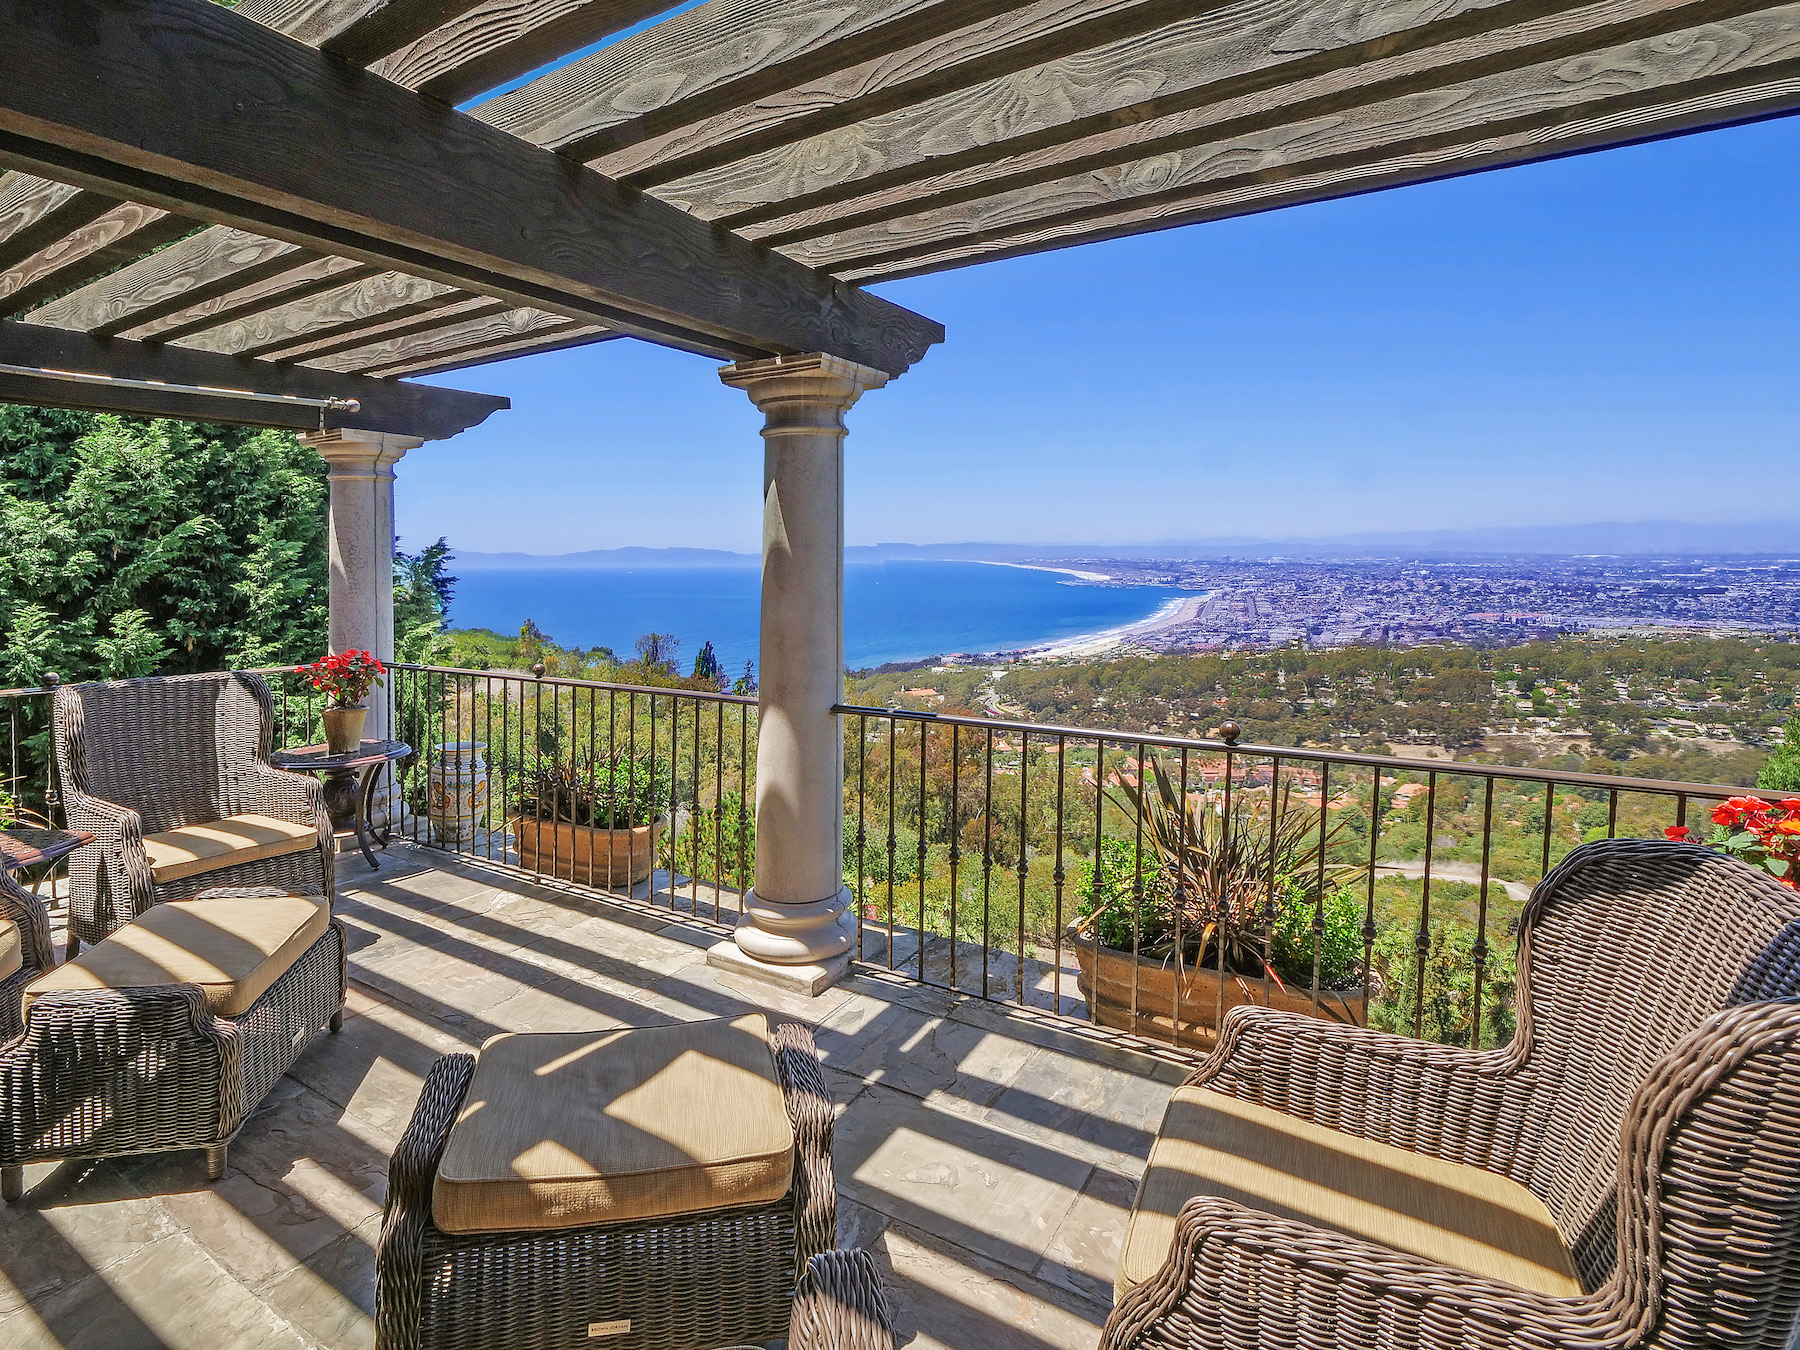 An outdoor sitting area with wicker chairs with a view of the ocean and a distant town.